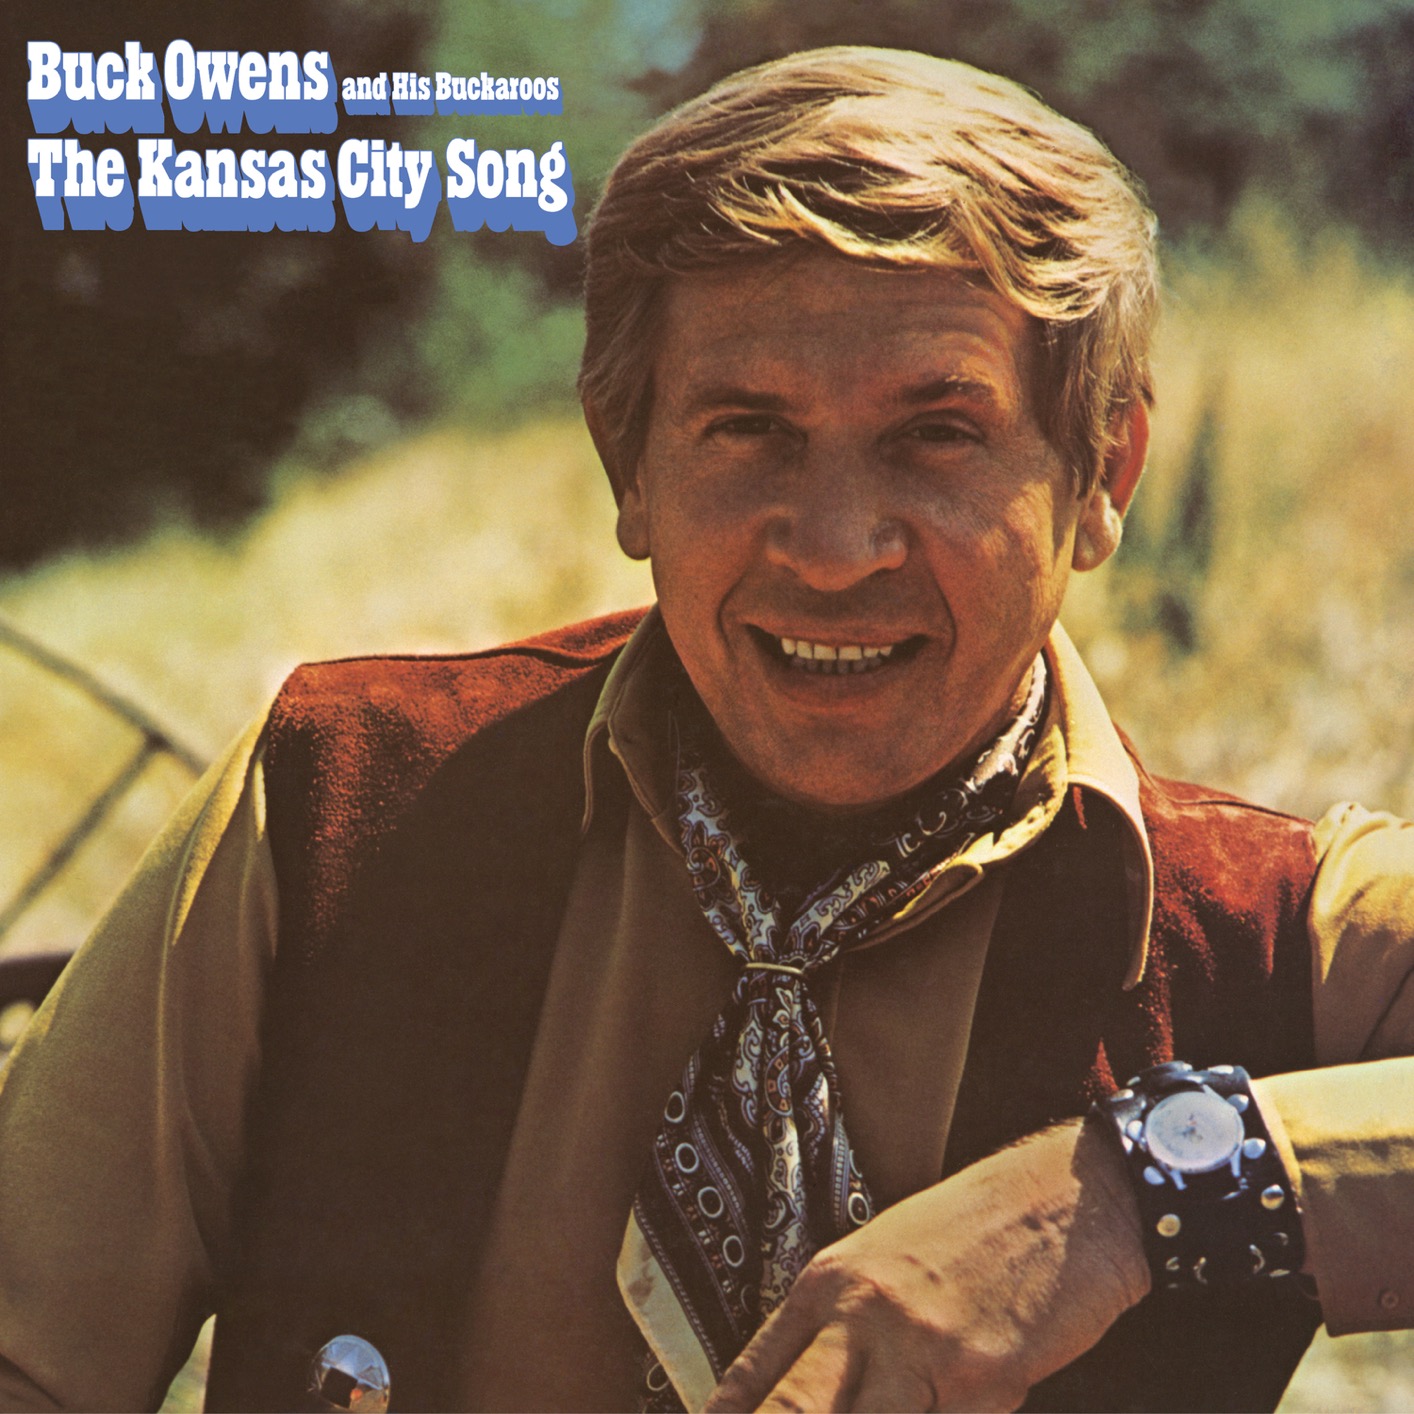 Buck Owens and His Buckaroos - The Kansas City Song (Remastered) (1970/2021) [FLAC 24bit/192kHz]